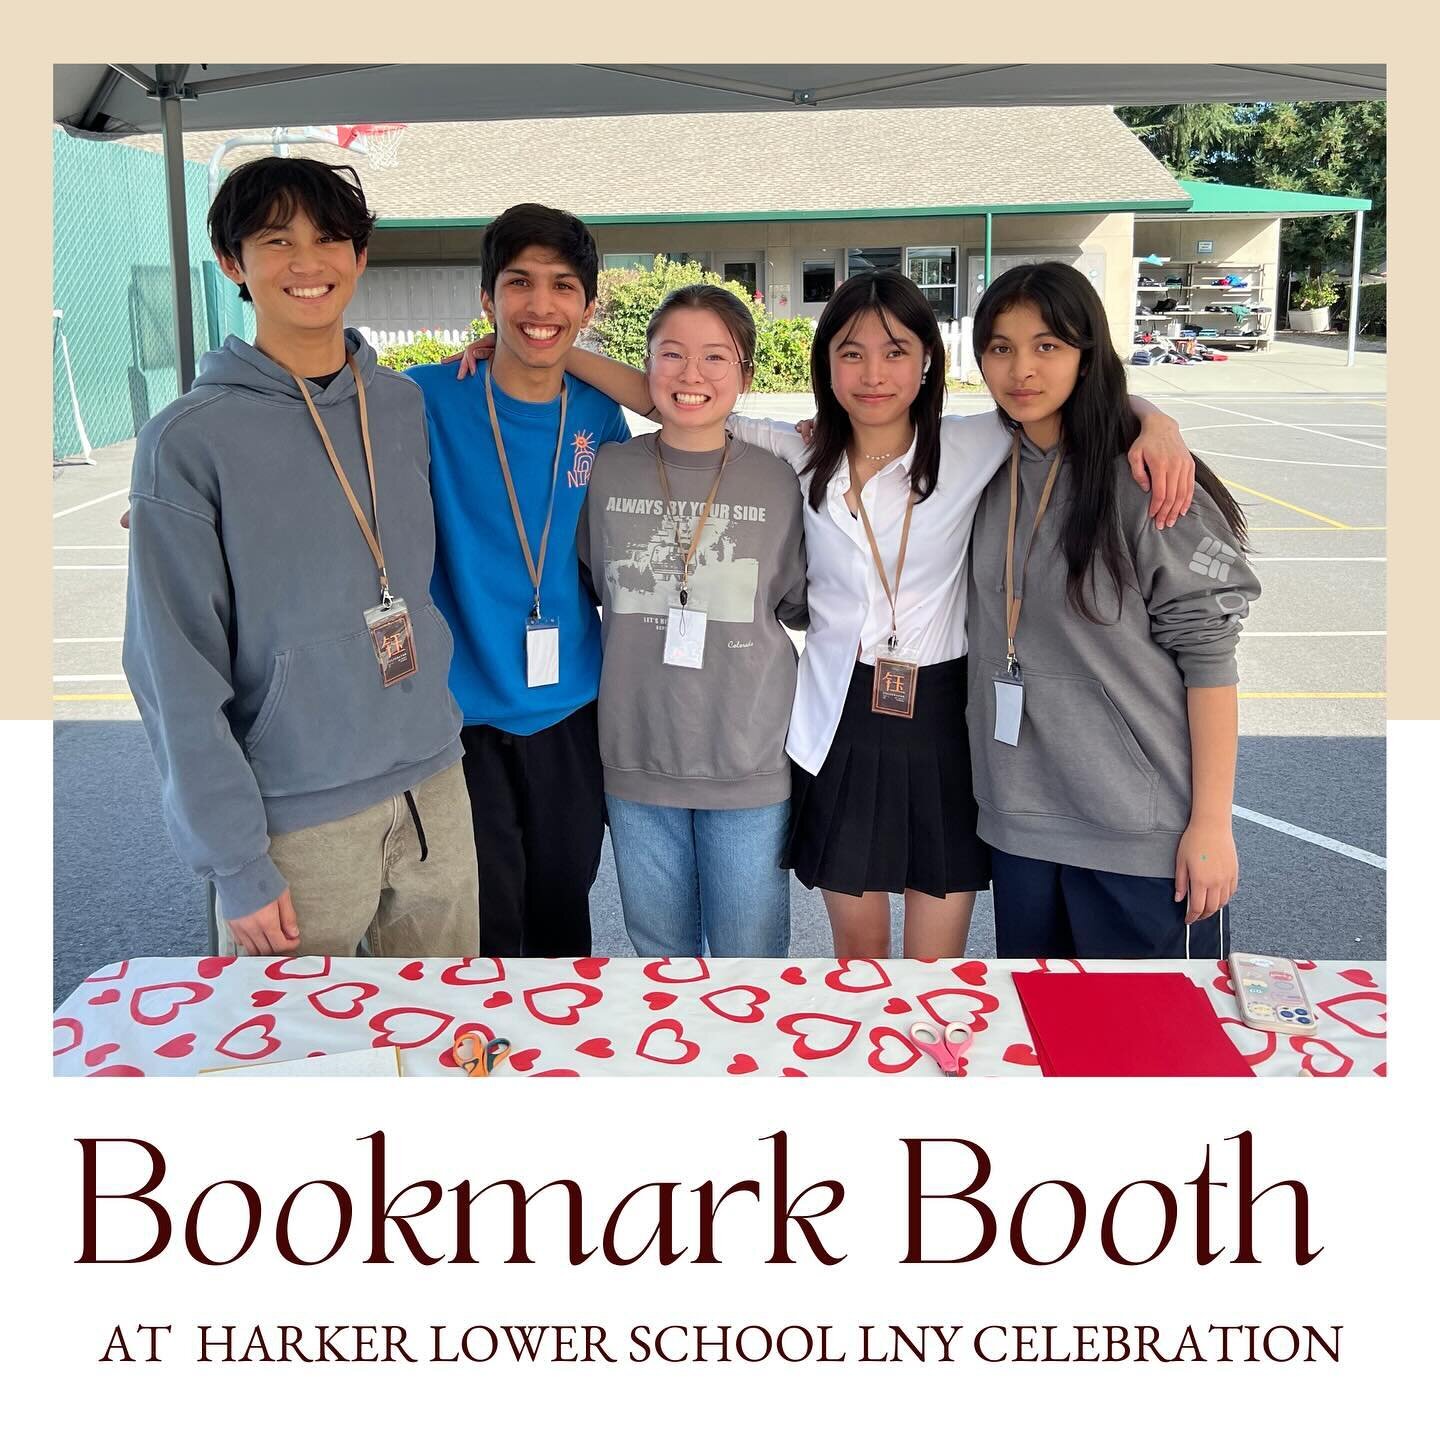 We had a wonderful time hosting a bookmark booth for the elementary schoolers at the Harker Lower School on February 9th, which is also Lunar New Year&rsquo;s Eve. ❤️💛 

We are so thankful for all the support we received to make this event possible.